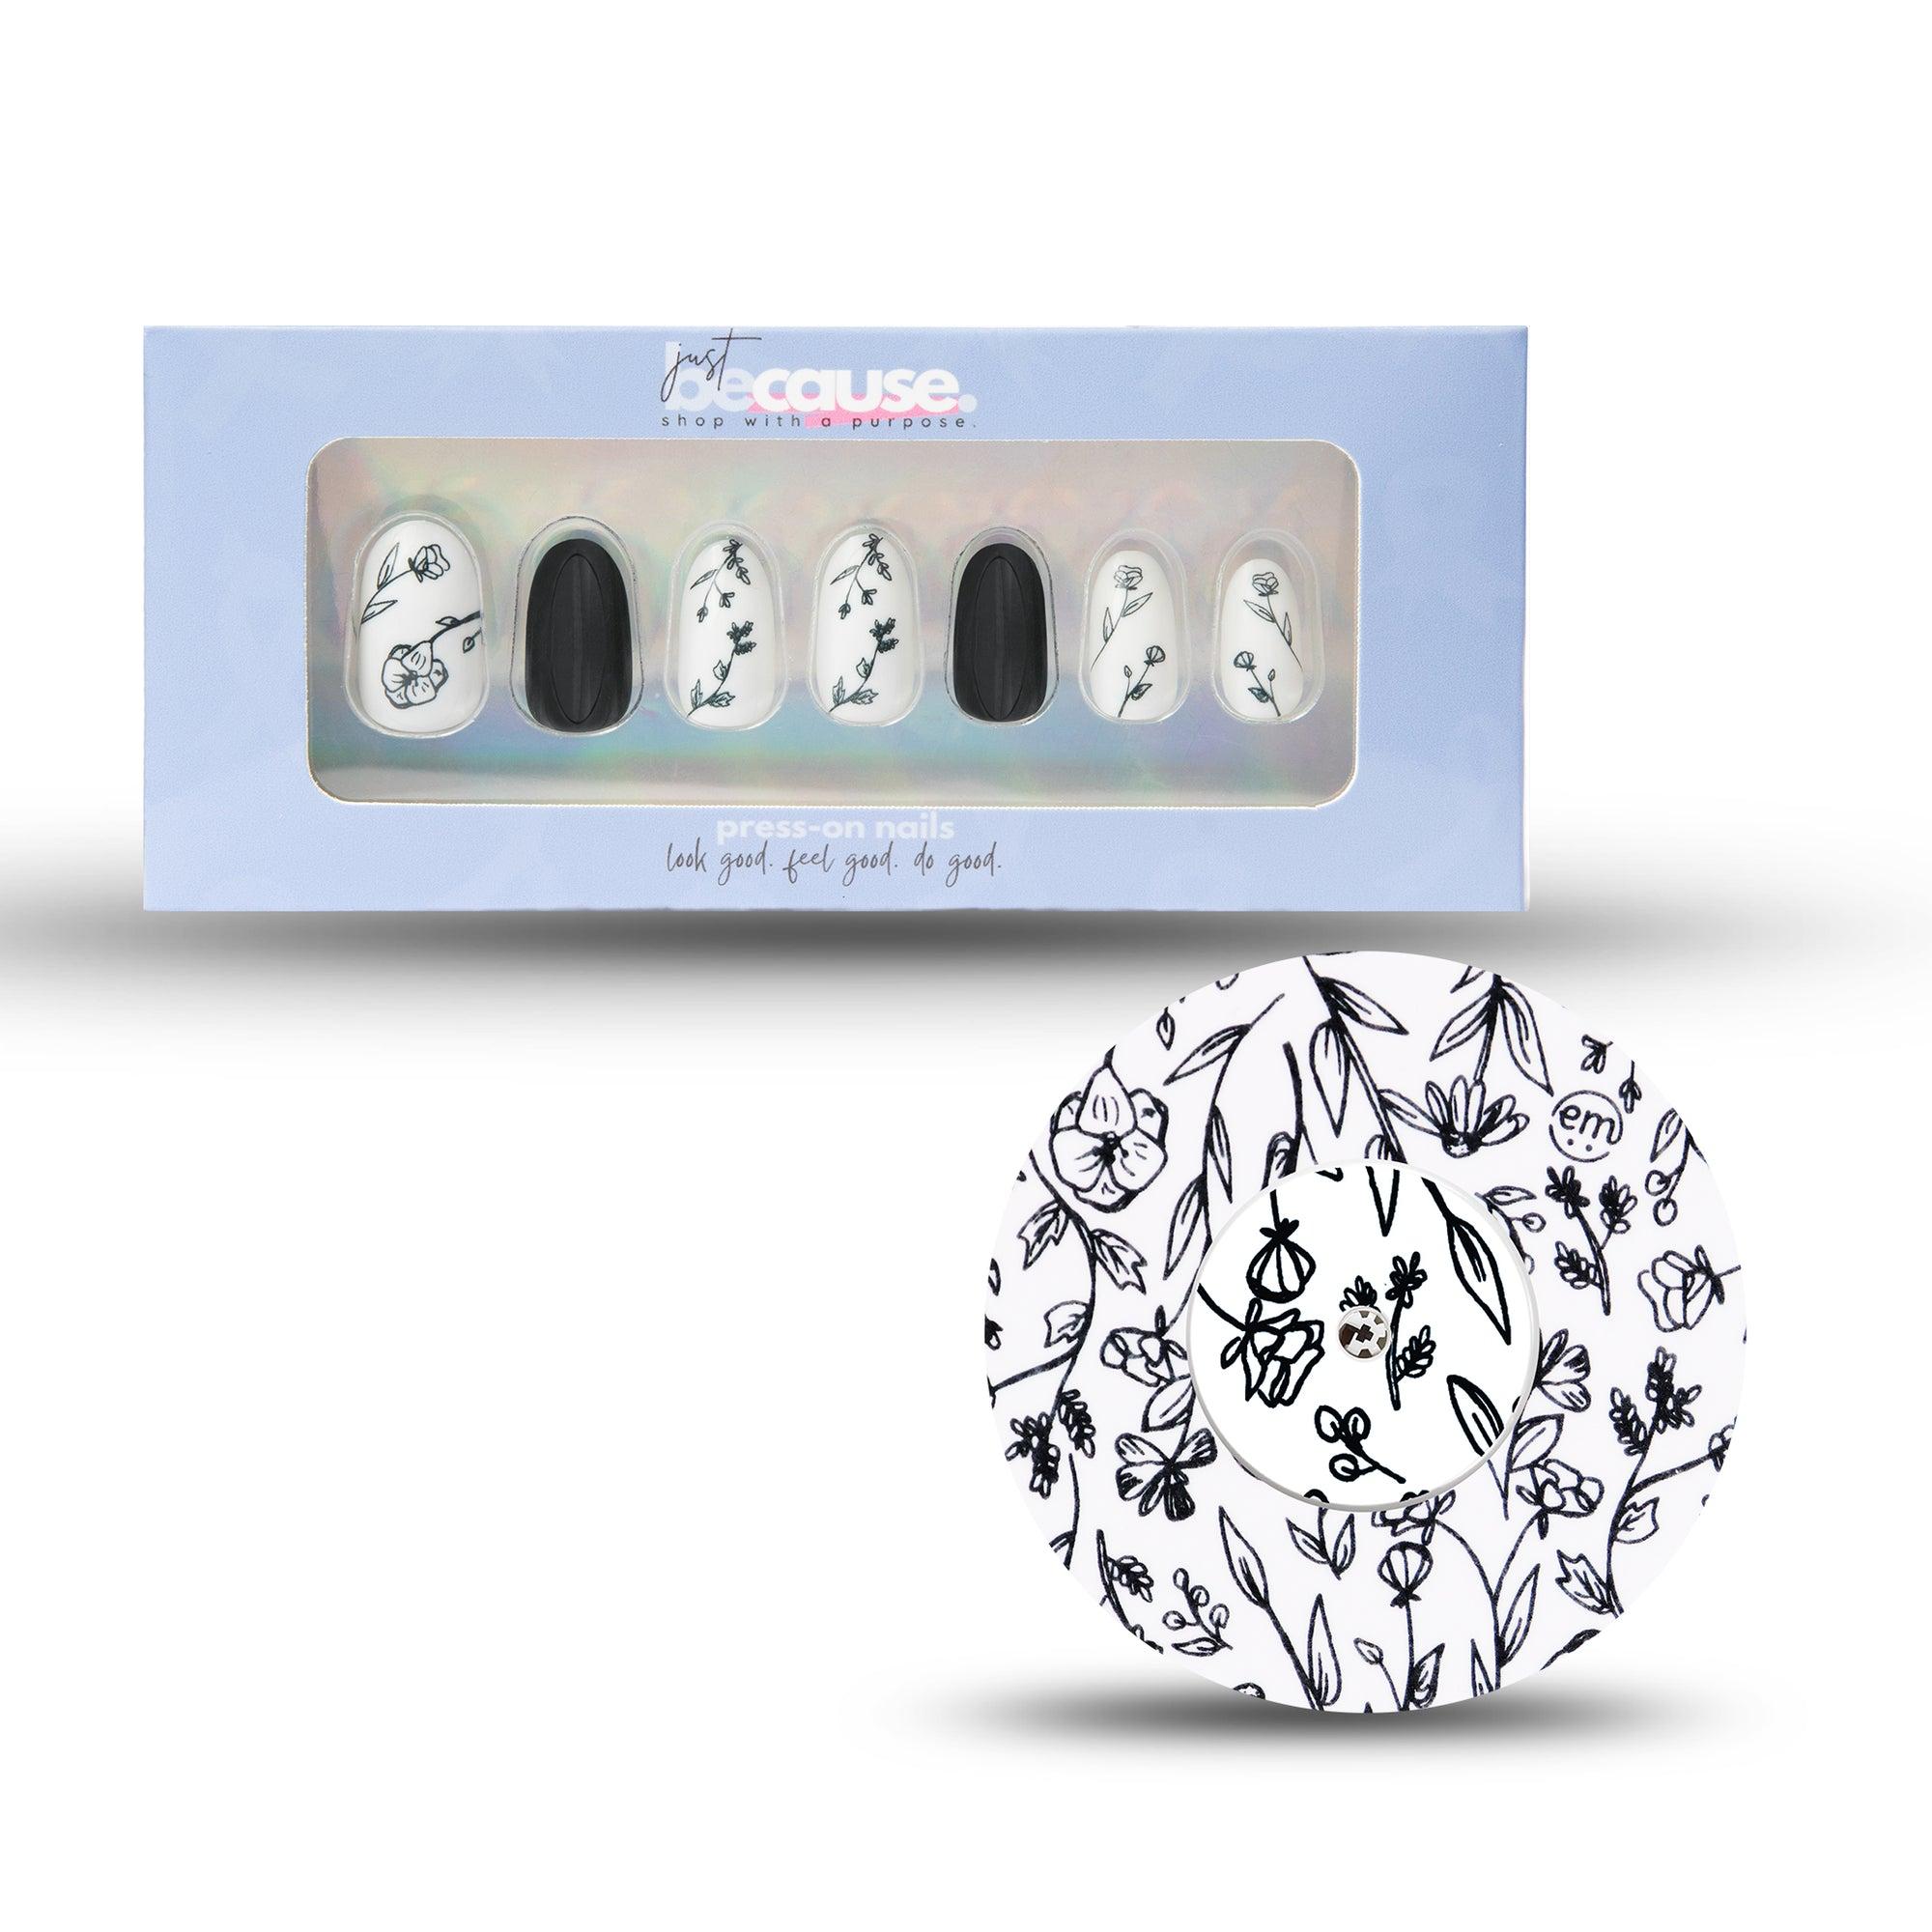 Just BeCause 24 Pcs ABS Press on nails Medium, Black & white floral Fake Nails set with matching Black & white floral Libre 2 Adhesive Tape and Center Sticker, Support T1D - ExpressionMed.com	